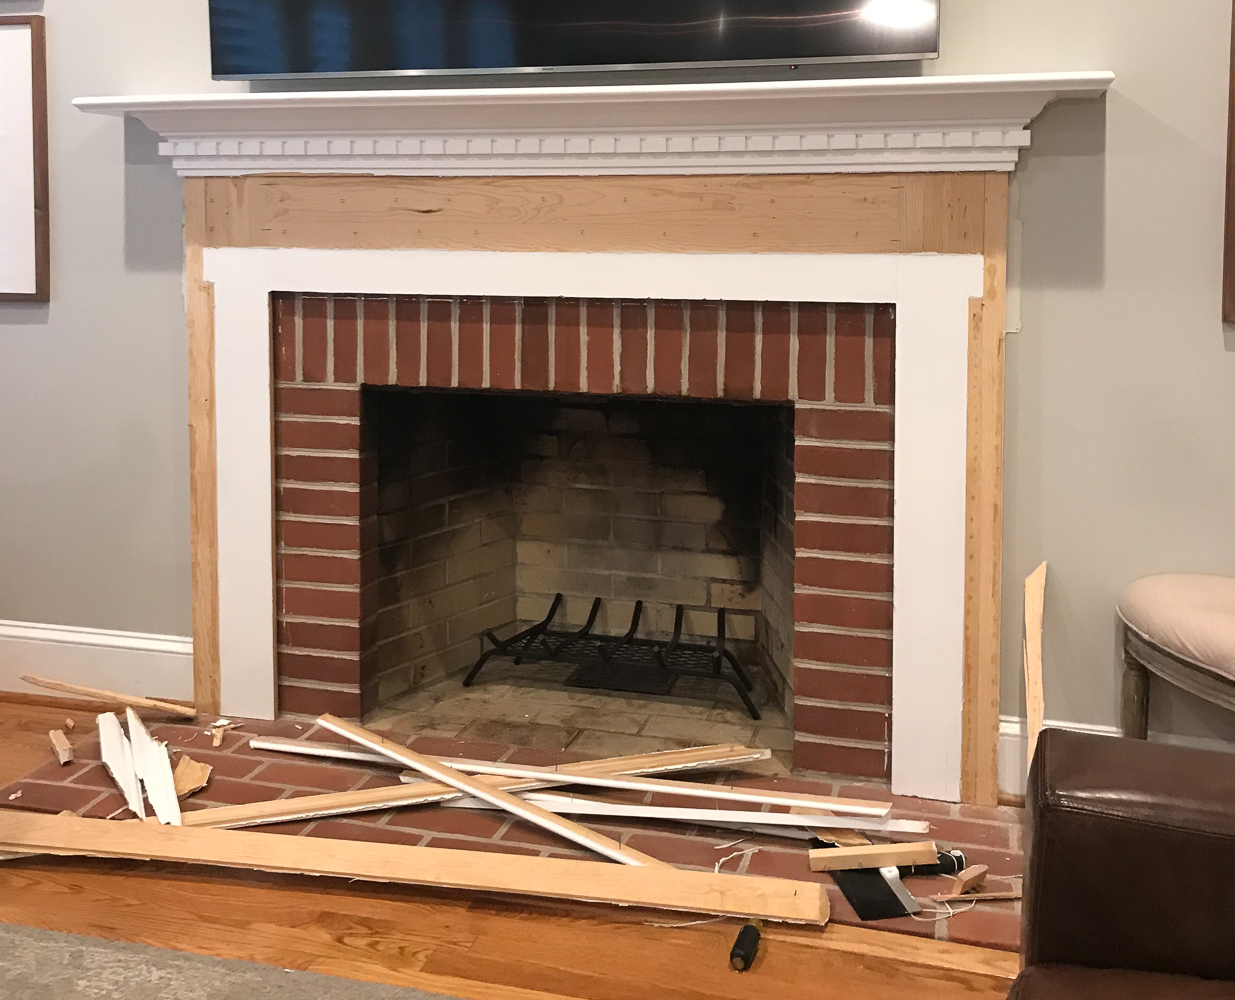 Demo of fireplace surround before adding tile over brick 